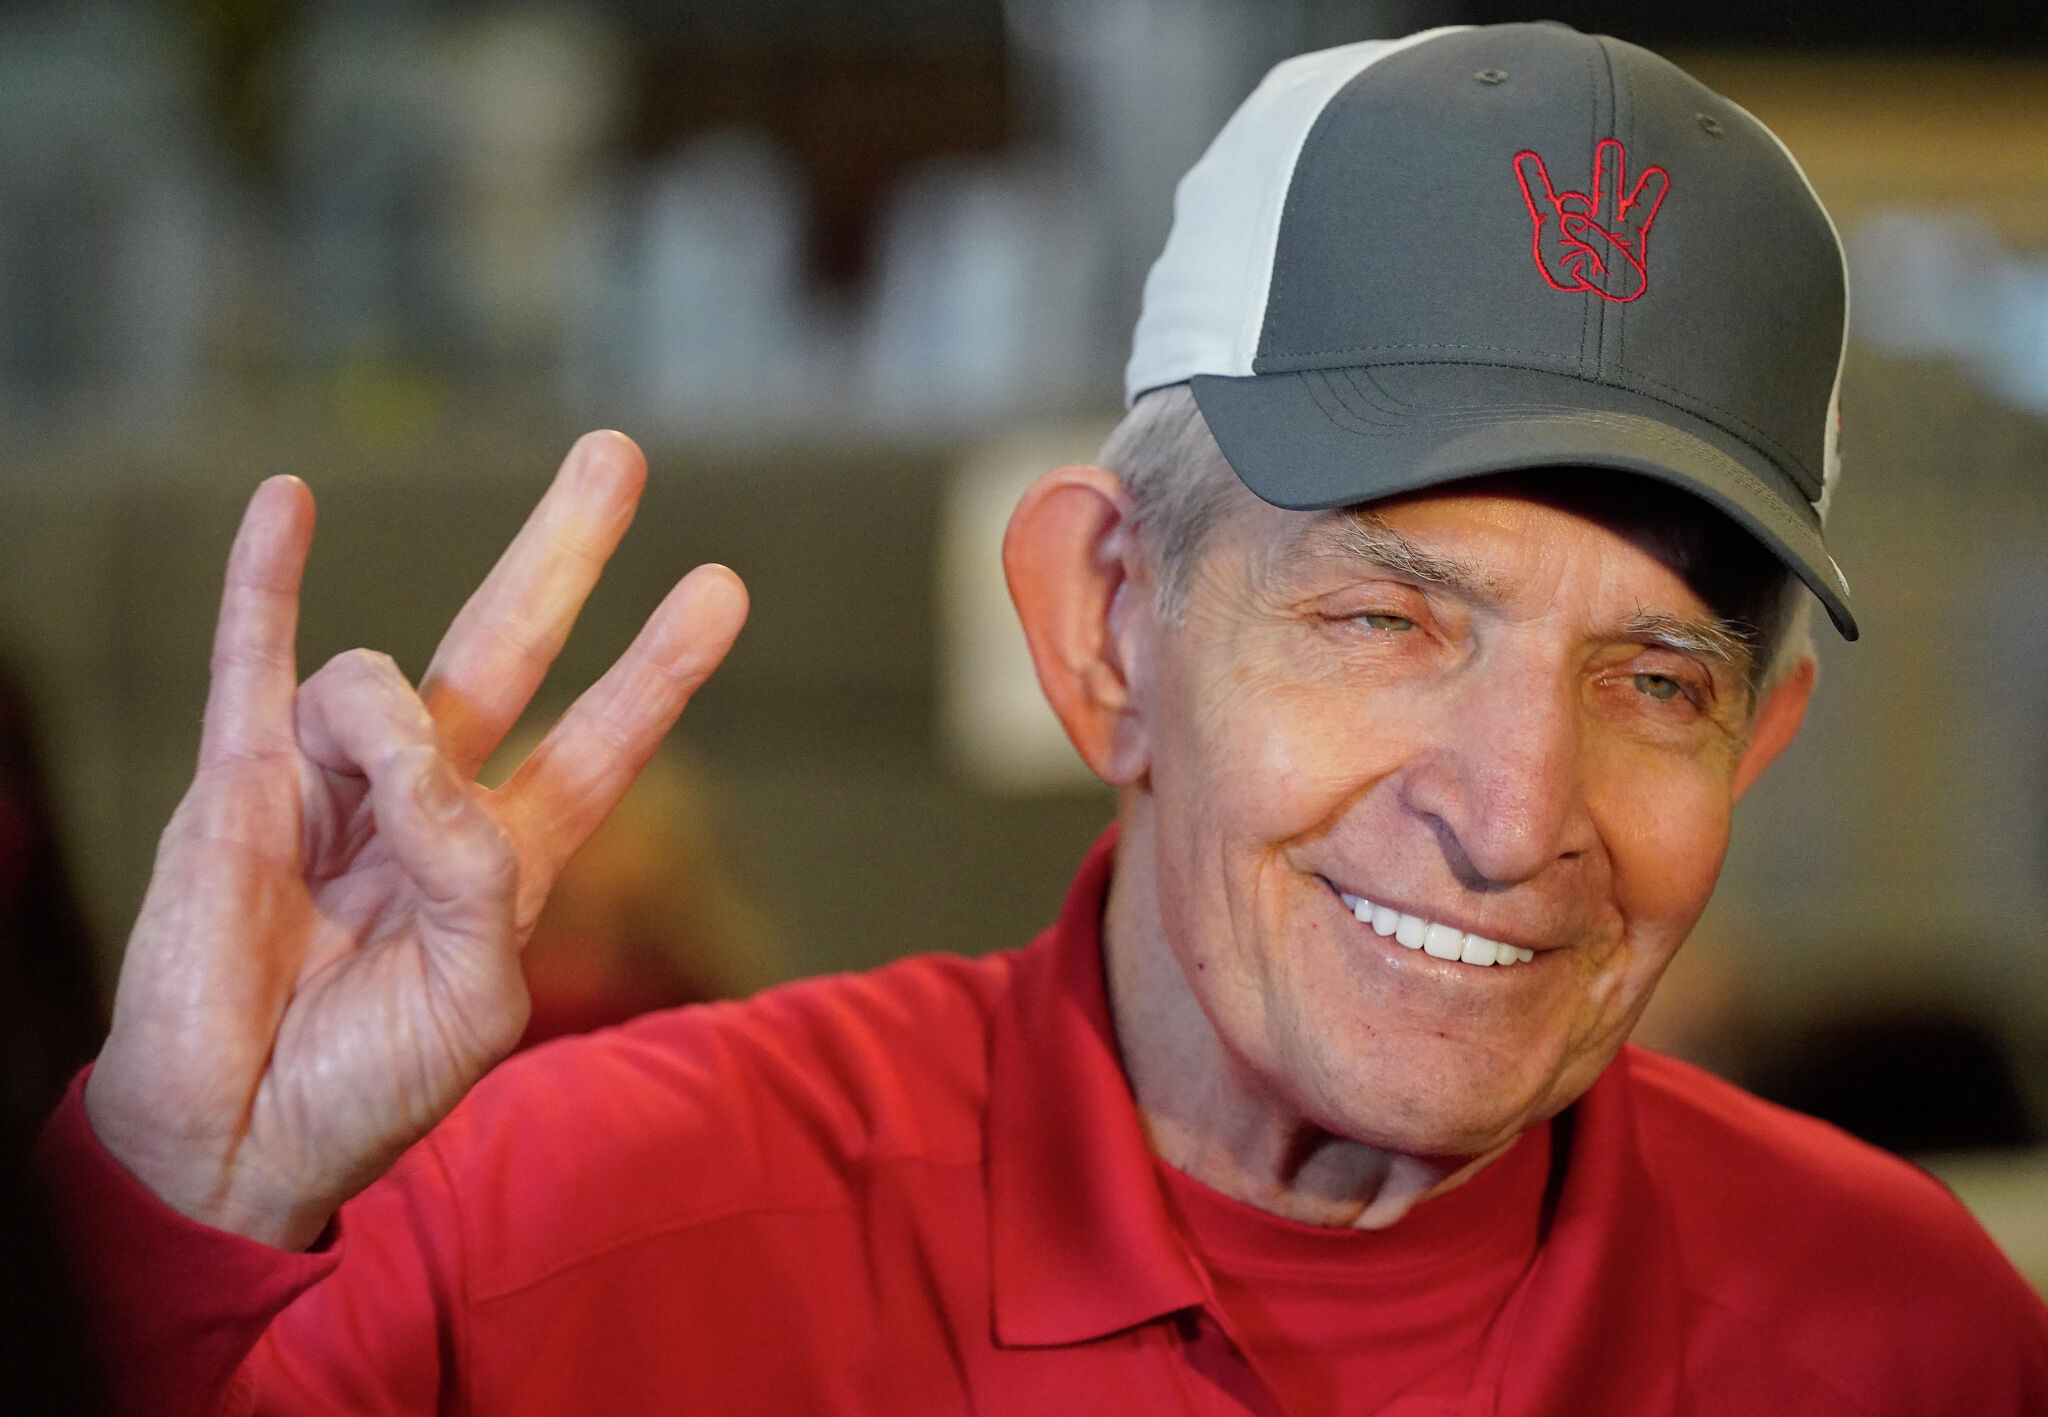 Mattress Mack' looks to make biggest sports betting payday ever if Astros  win World Series